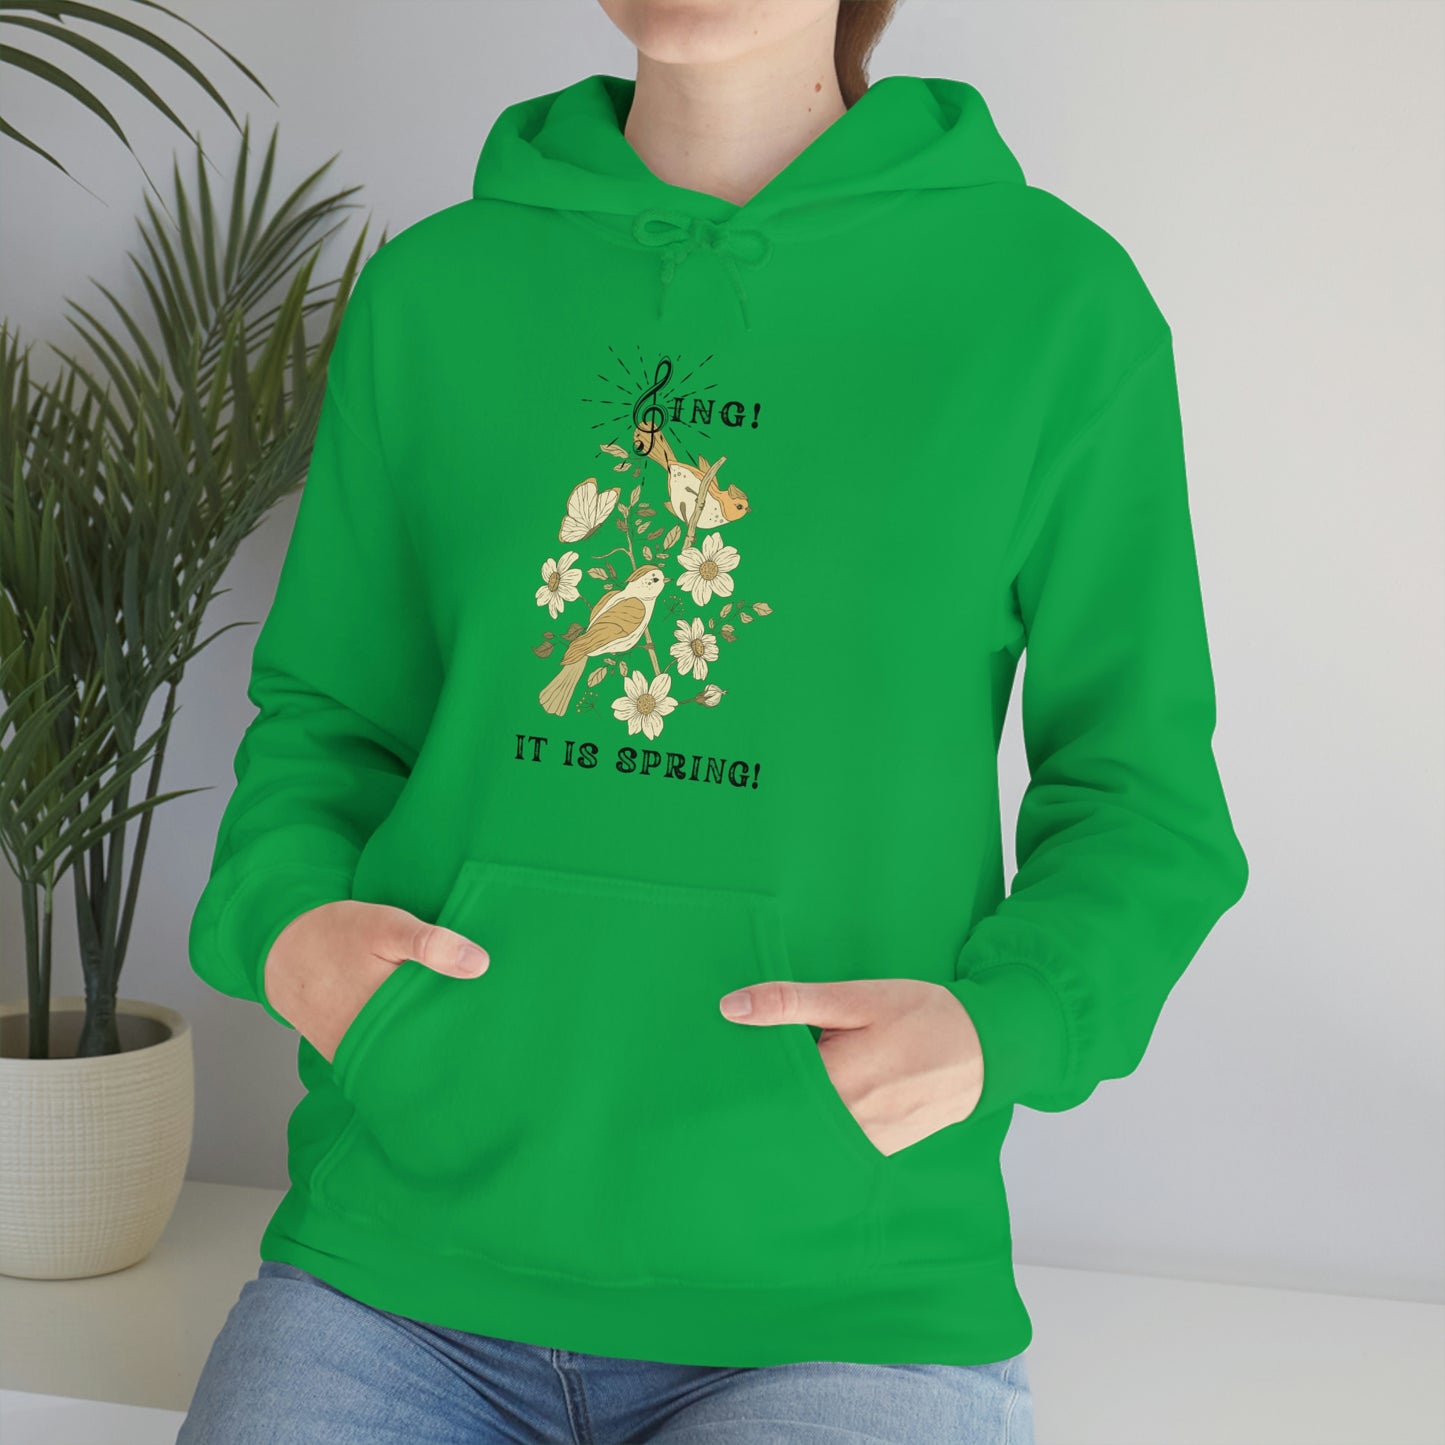 SING IT IS SPRING UNISEX HOODED SWEATSHIRT GIFT WITH  BLACK FONT